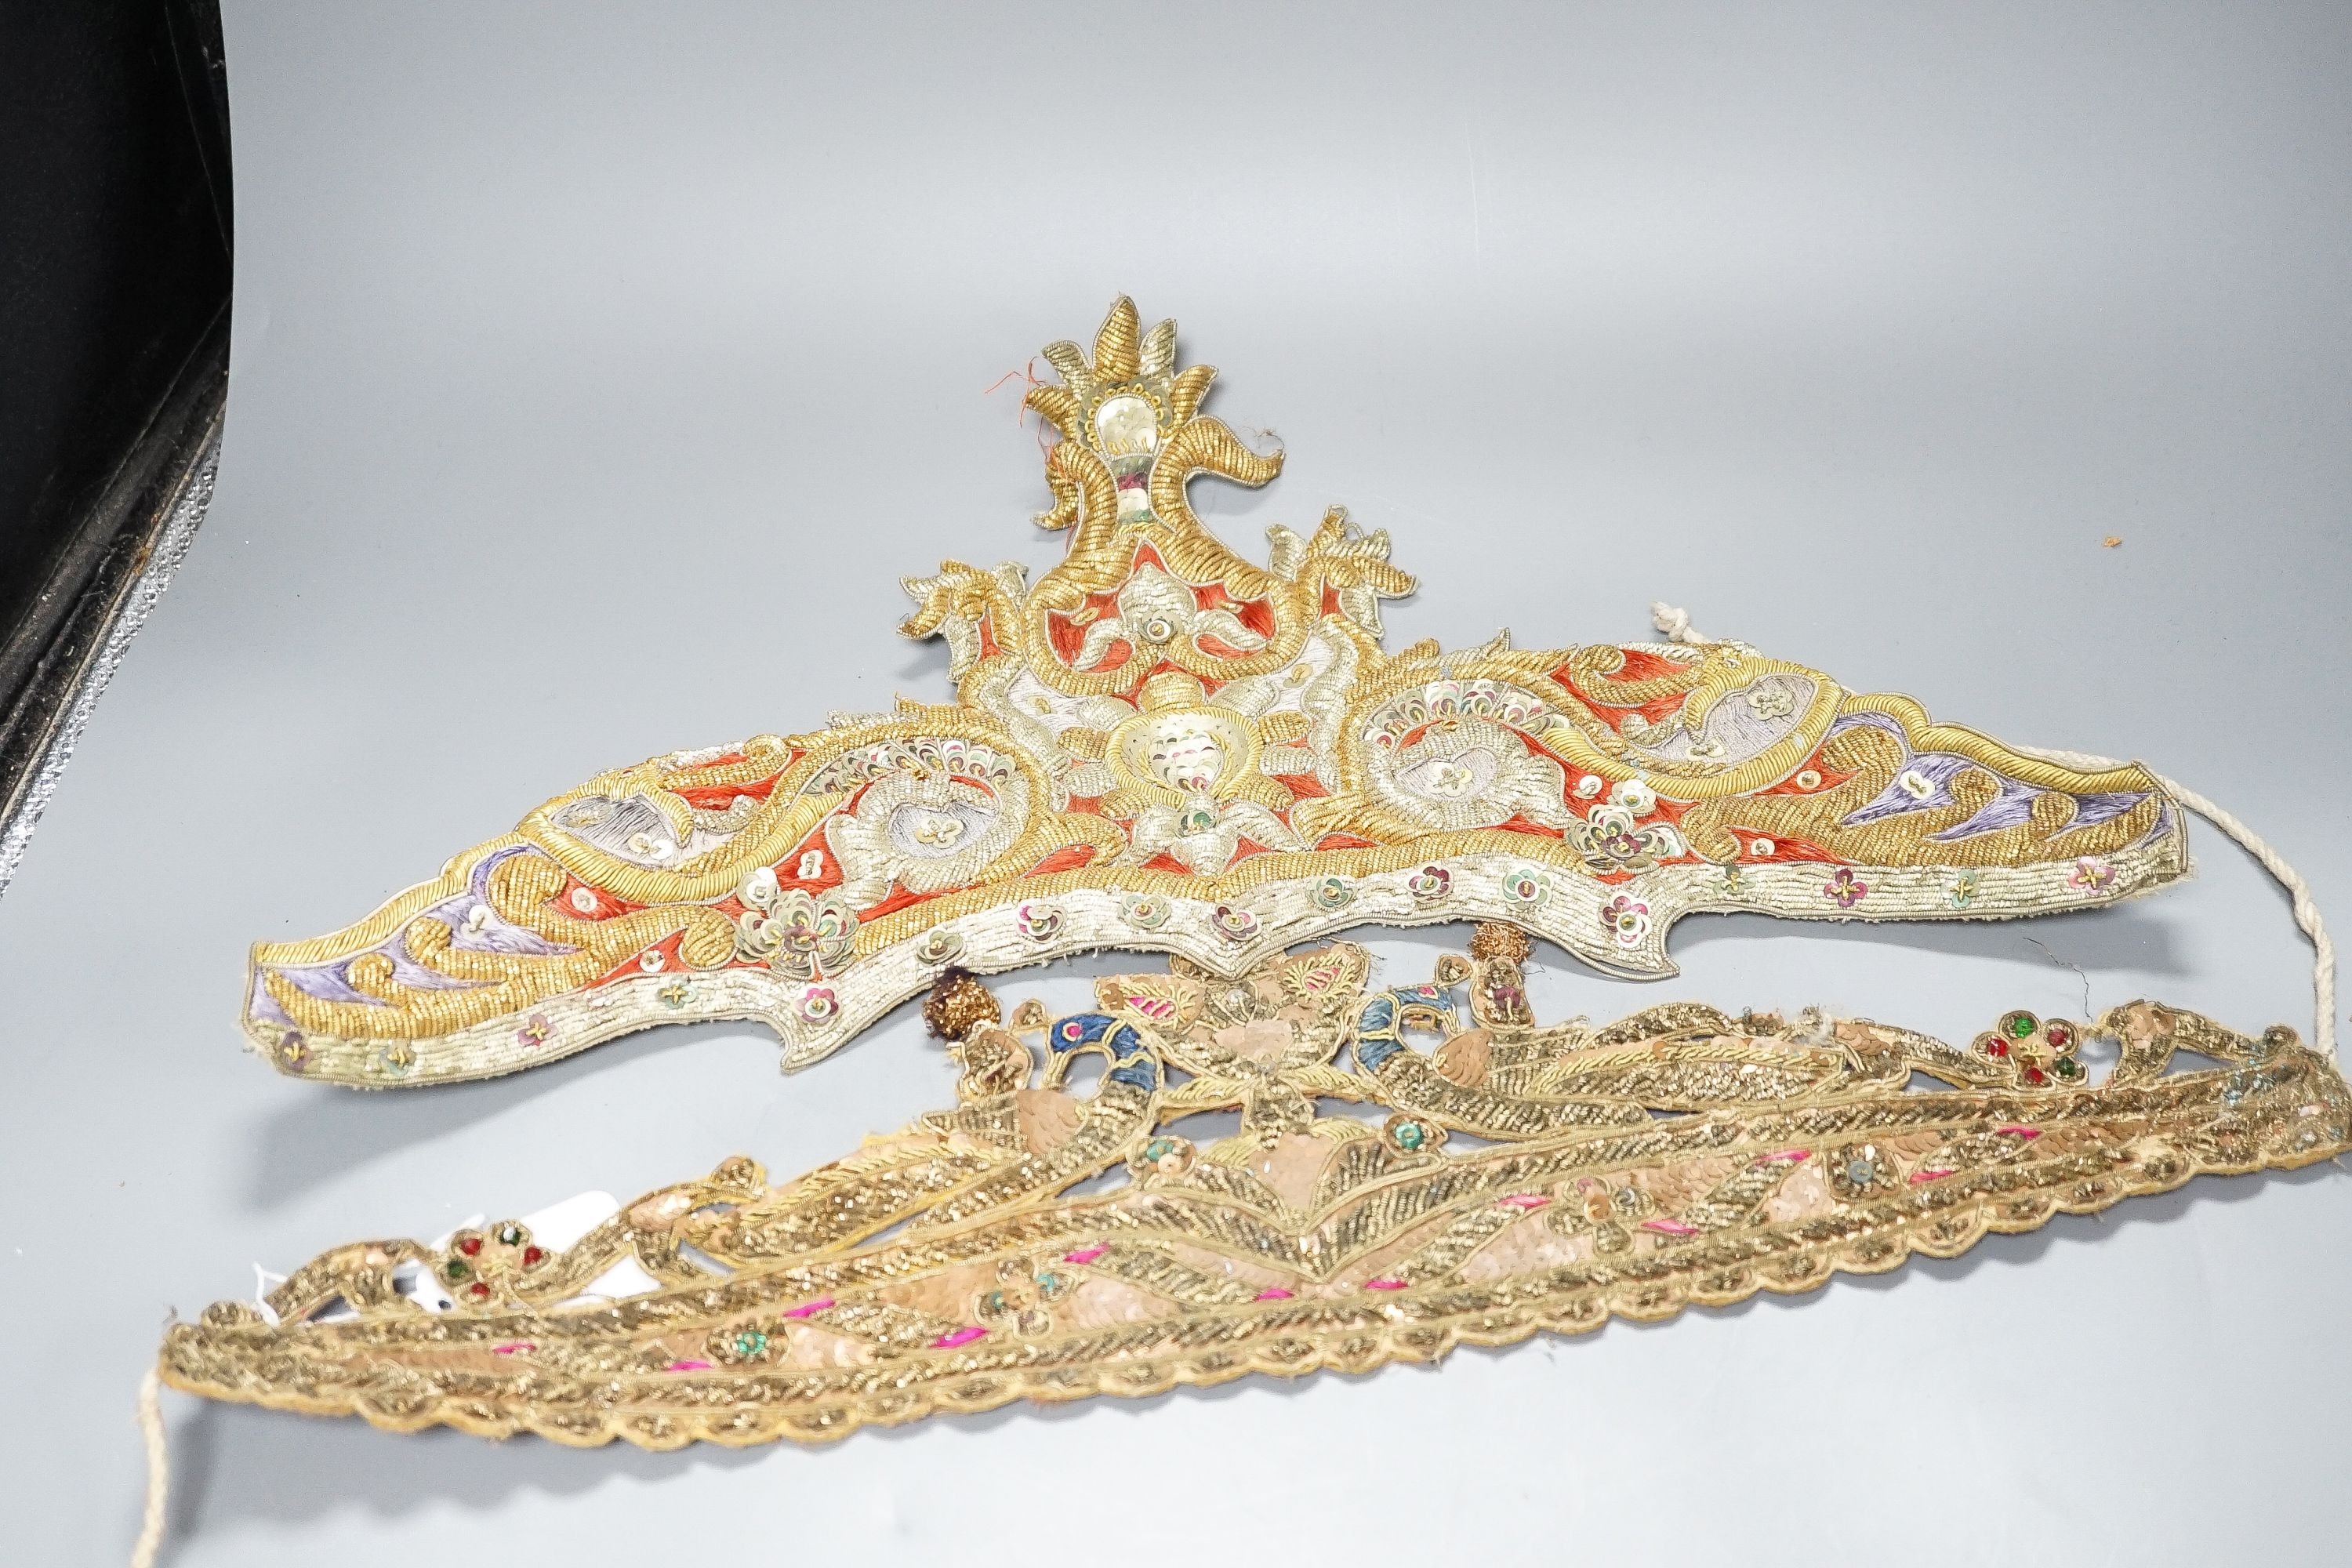 Highly ornate indian silver and gold thread headresses